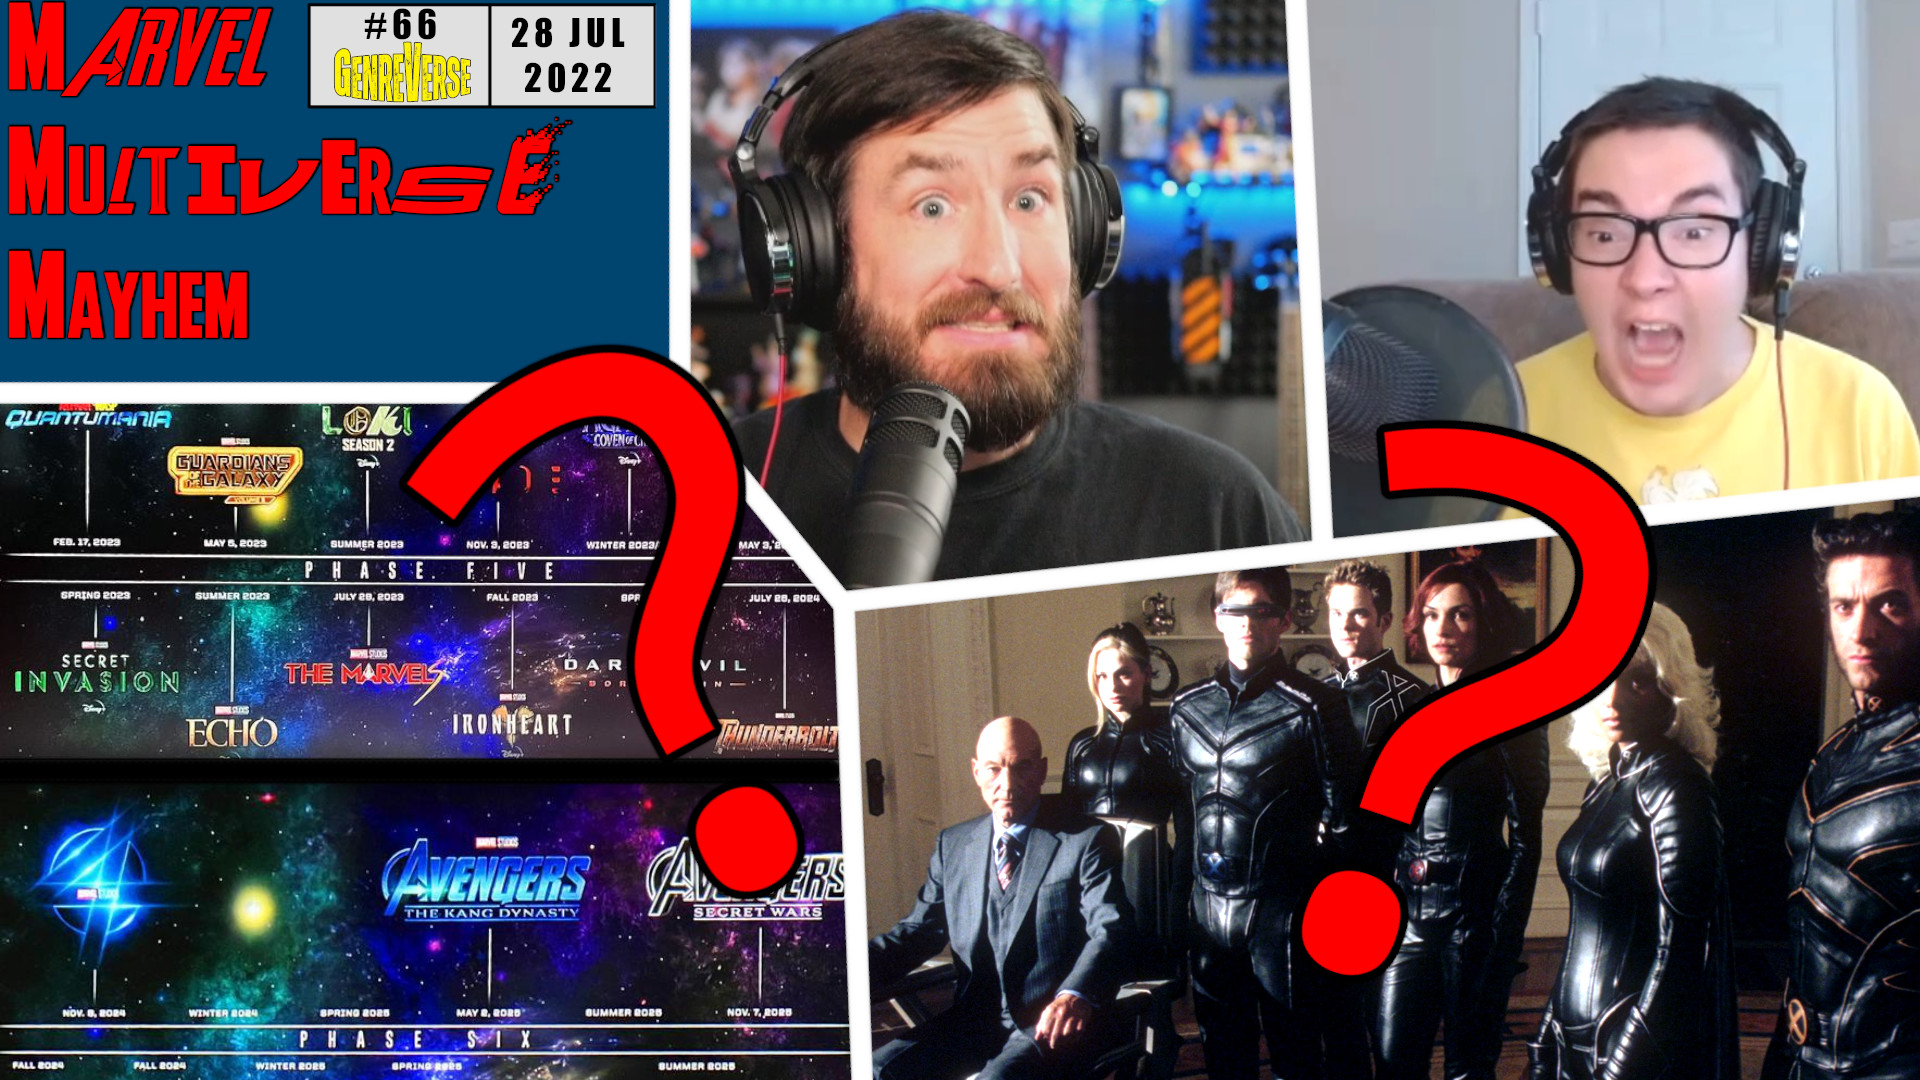 Podcast hosts Kyle and Nick express confusion and anger. Images from Marvel Studios' Comic-Con 2022 panel shows MCU release schedule and the 2000 X-men team is shown with question marks over them